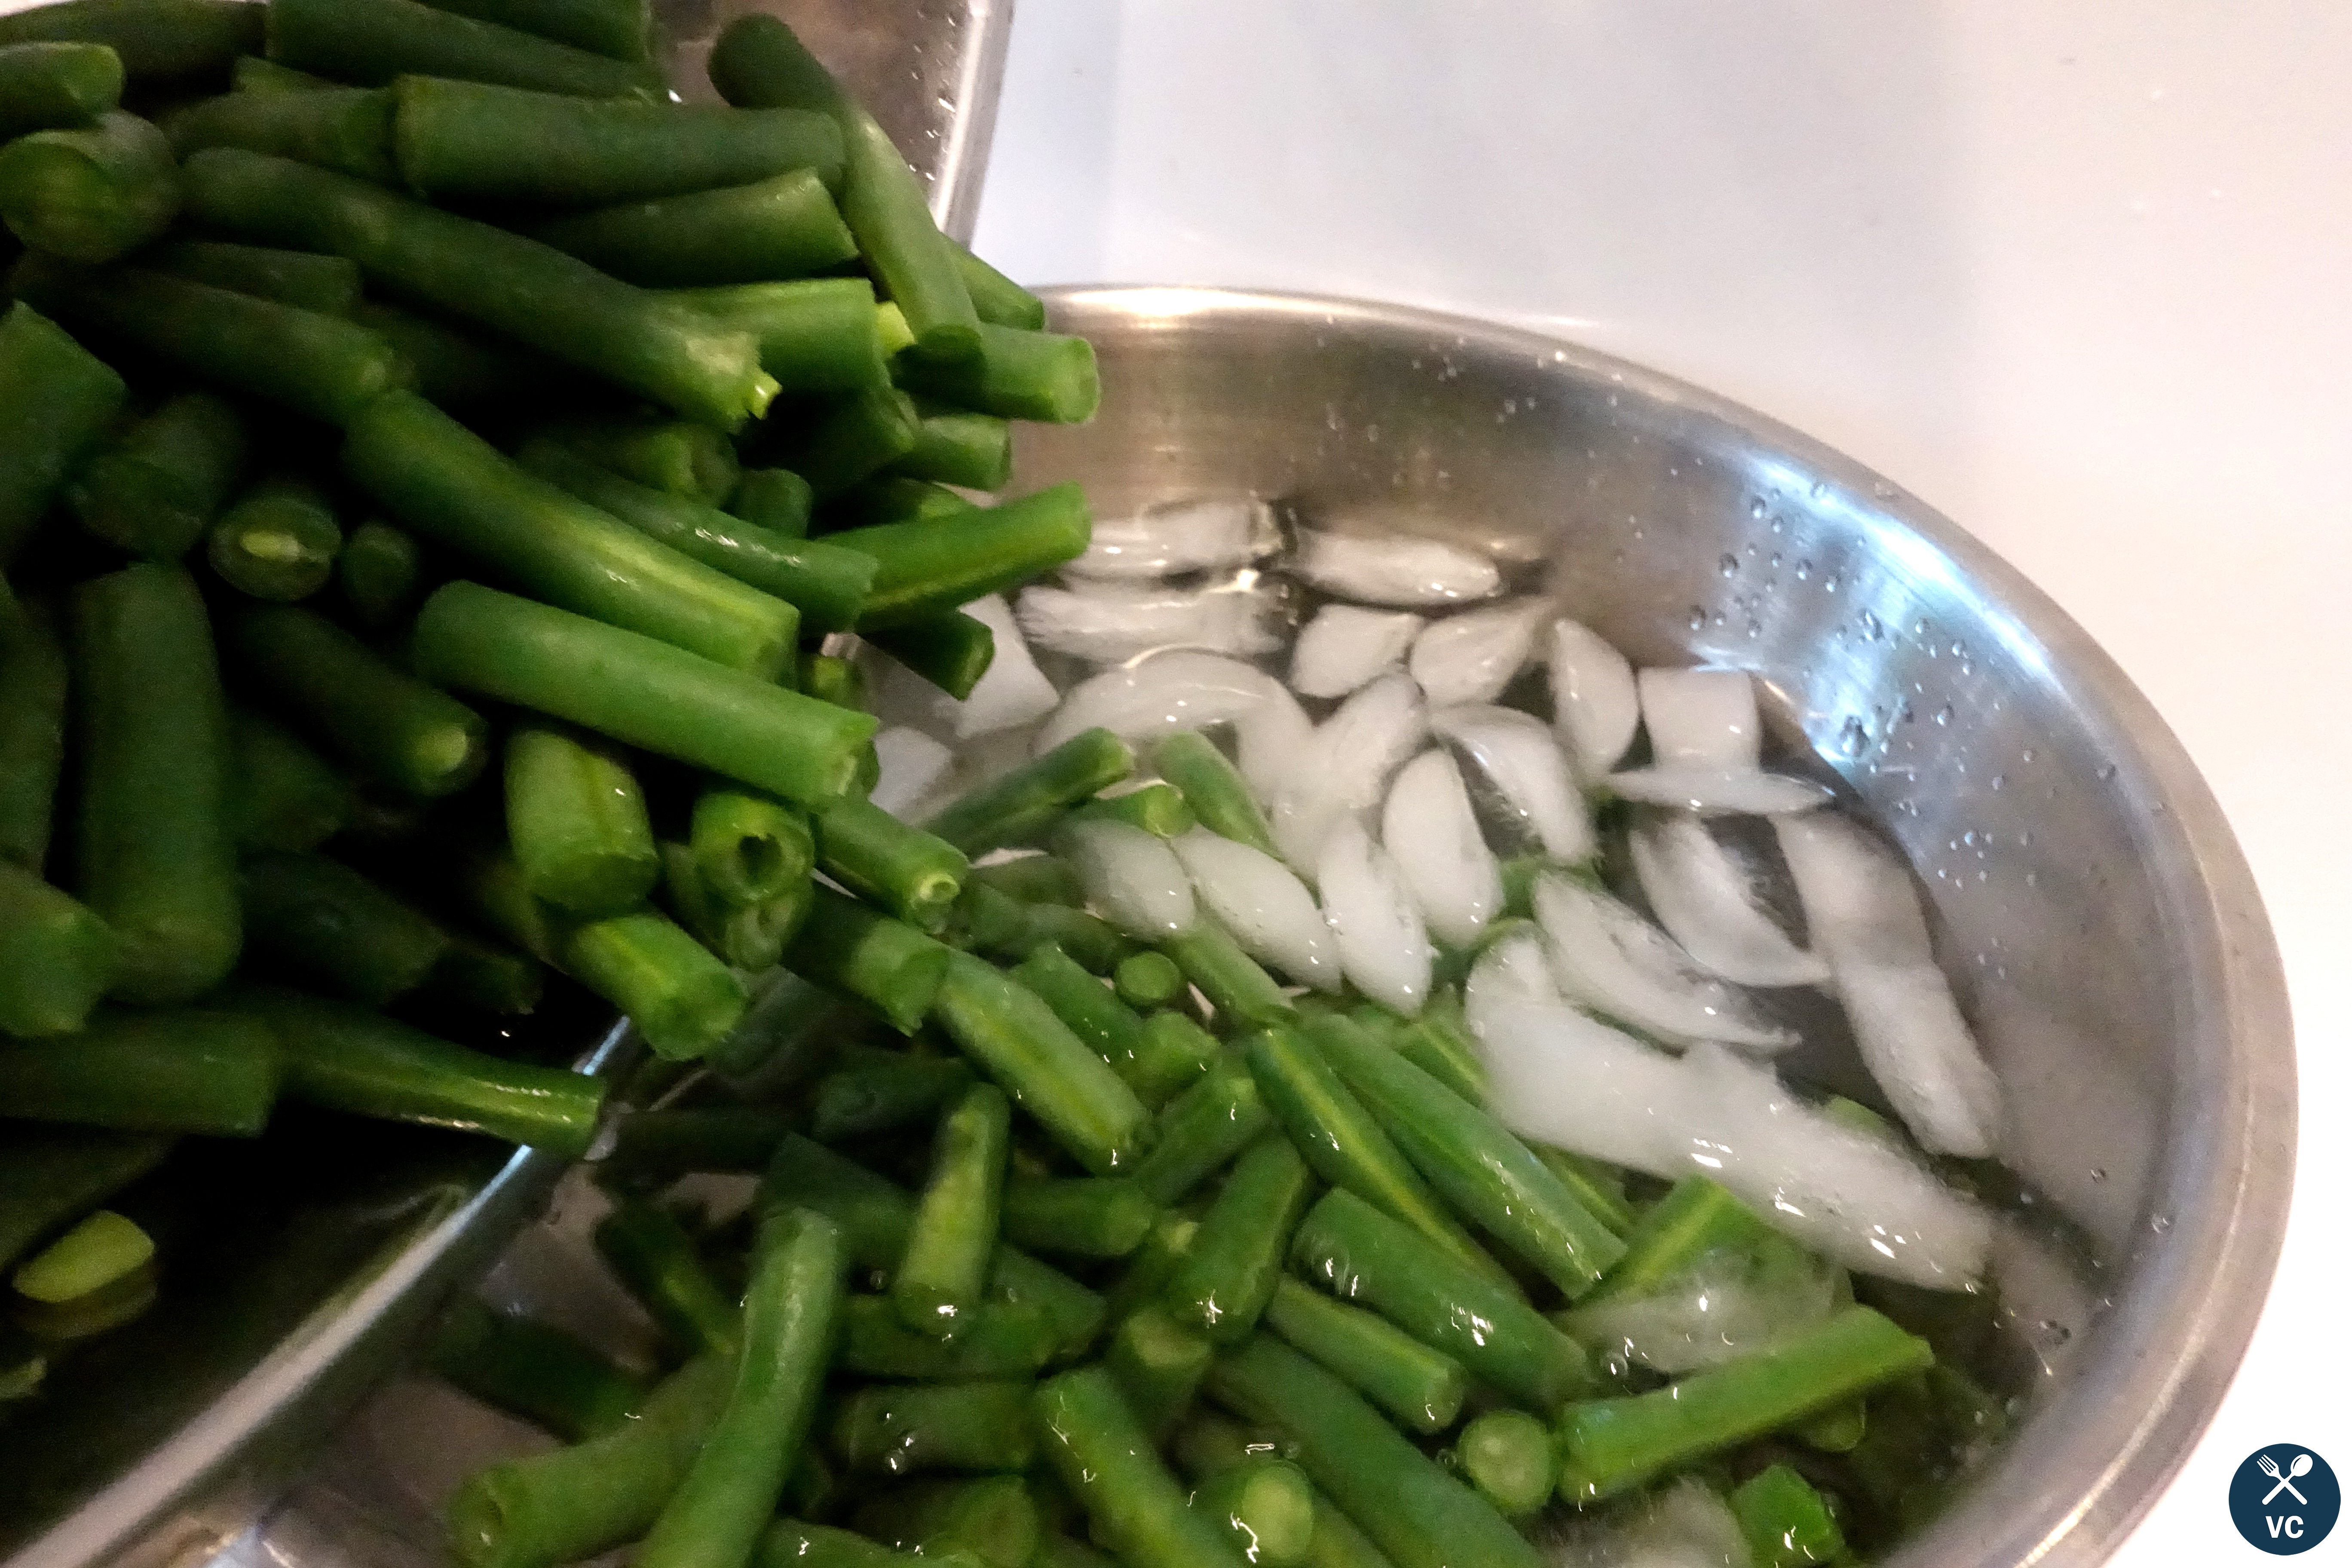 Placing blanched green beans in ice water for Chinese green beans (VC in the Kitchen)